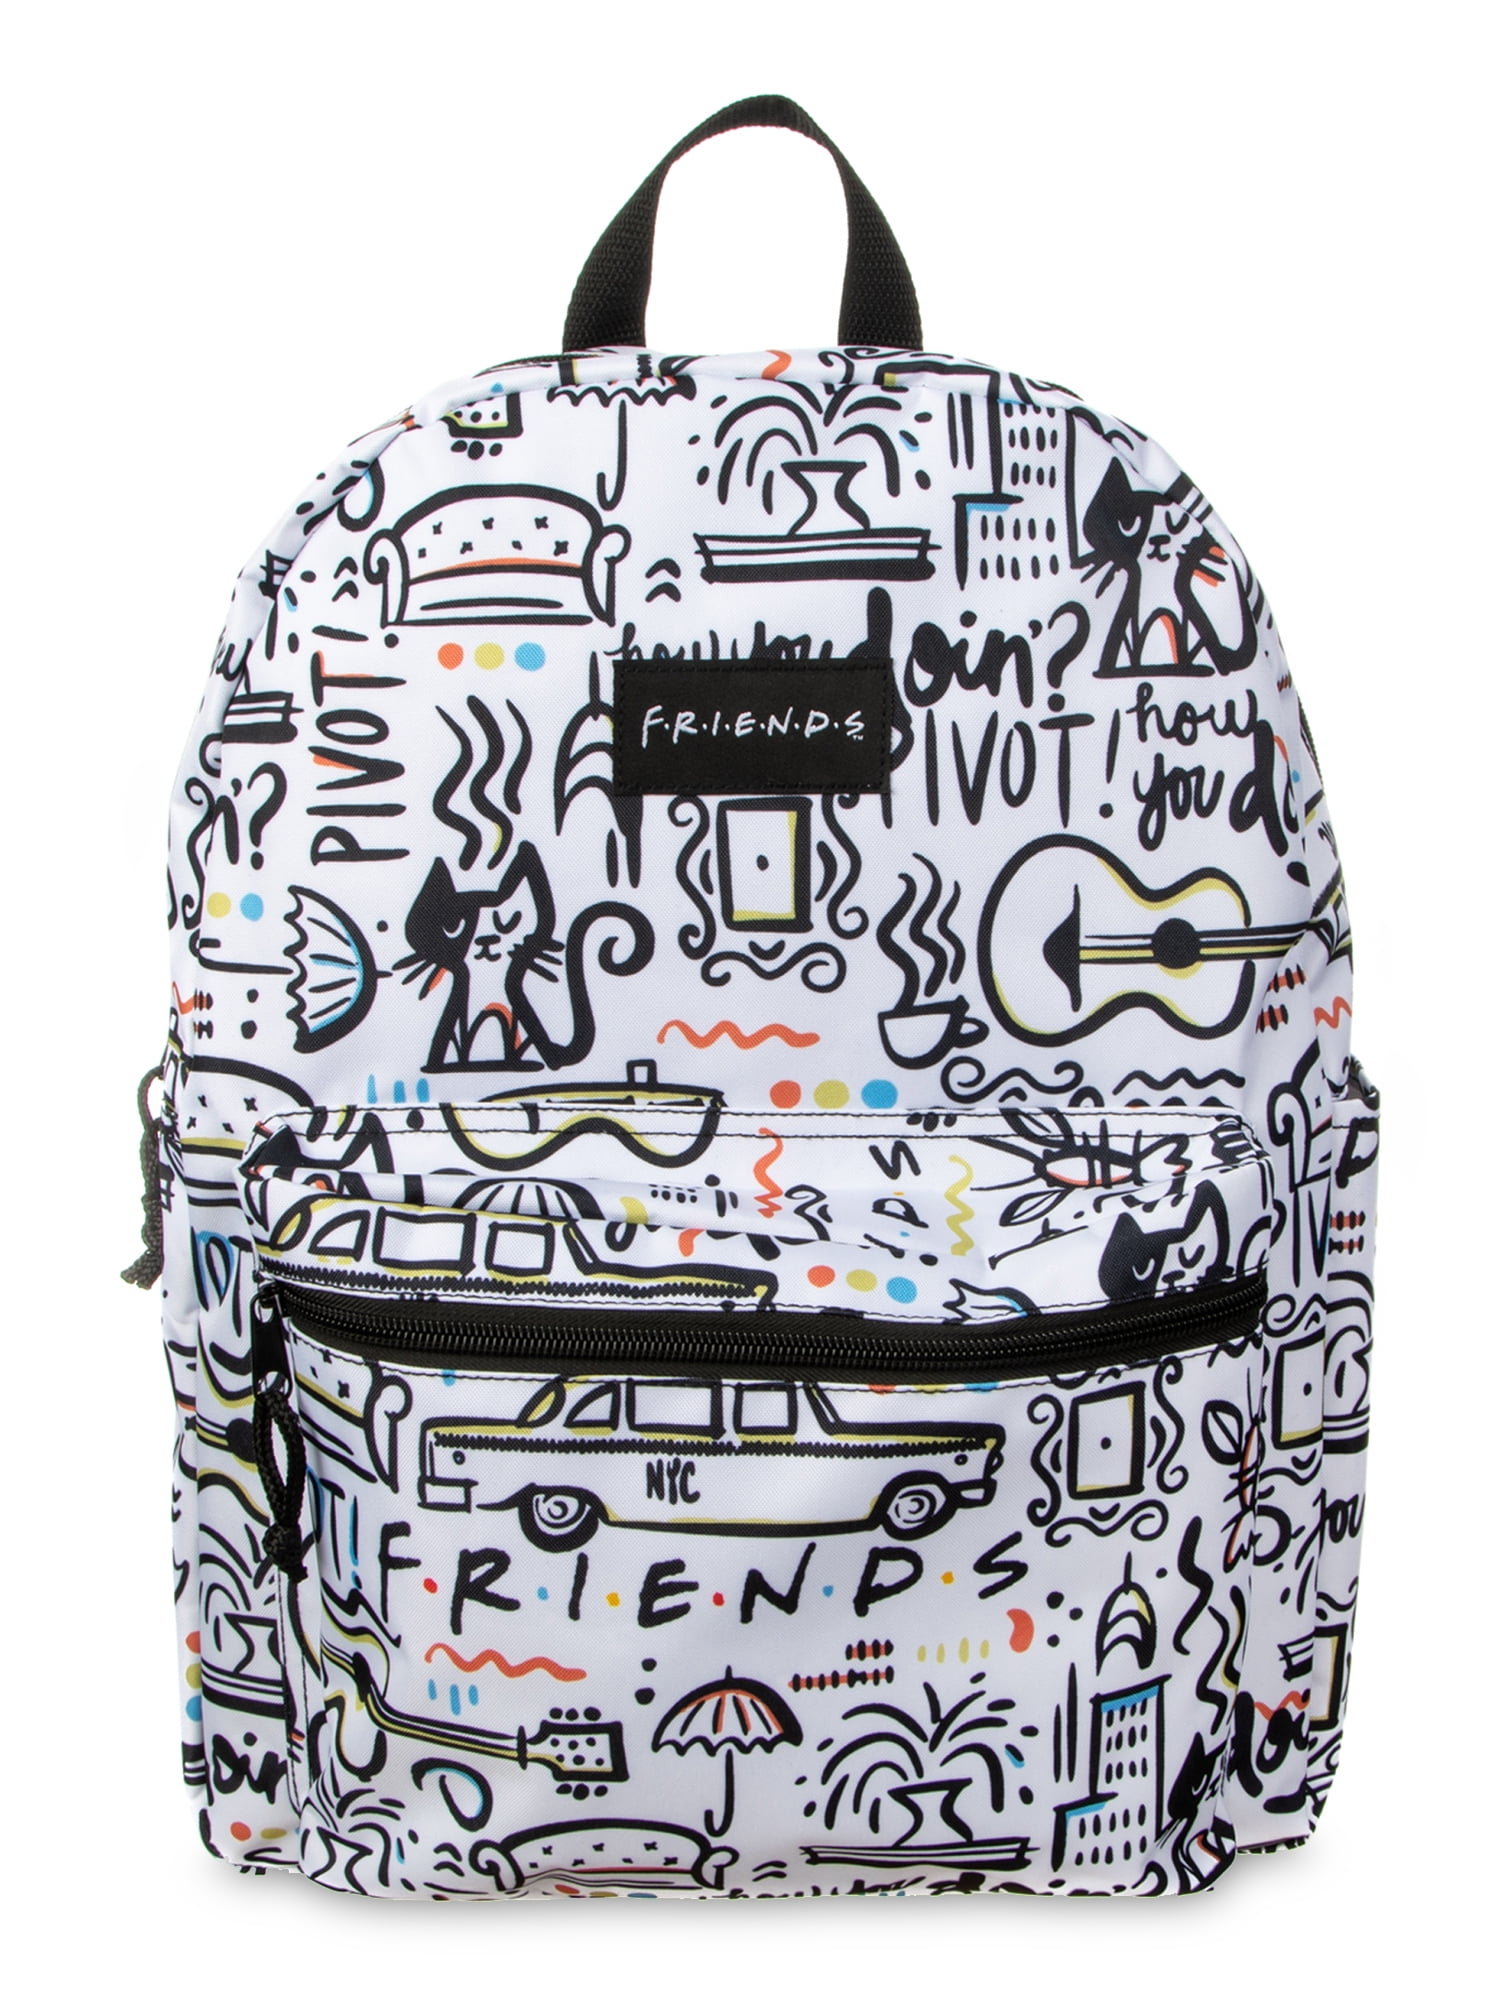 Friends Central Perk Comic Printed 90s TV Show School Backpack Book Bag 